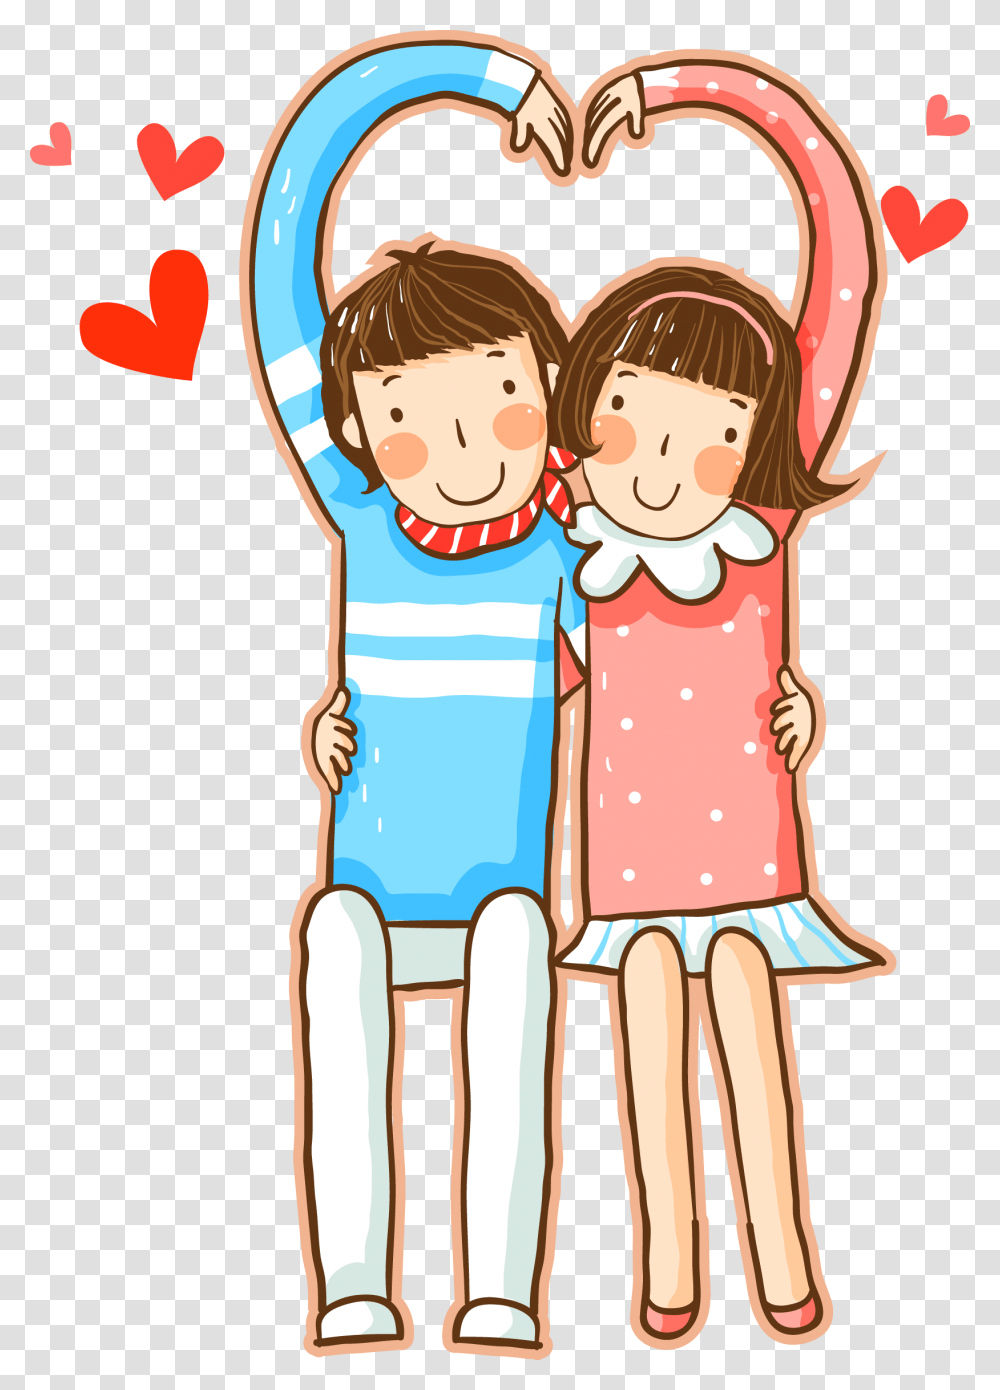 Significant Other Cartoon Heart Cute Couple Transprent Cute Couple Love Cartoon, Female, Girl, Drawing Transparent Png